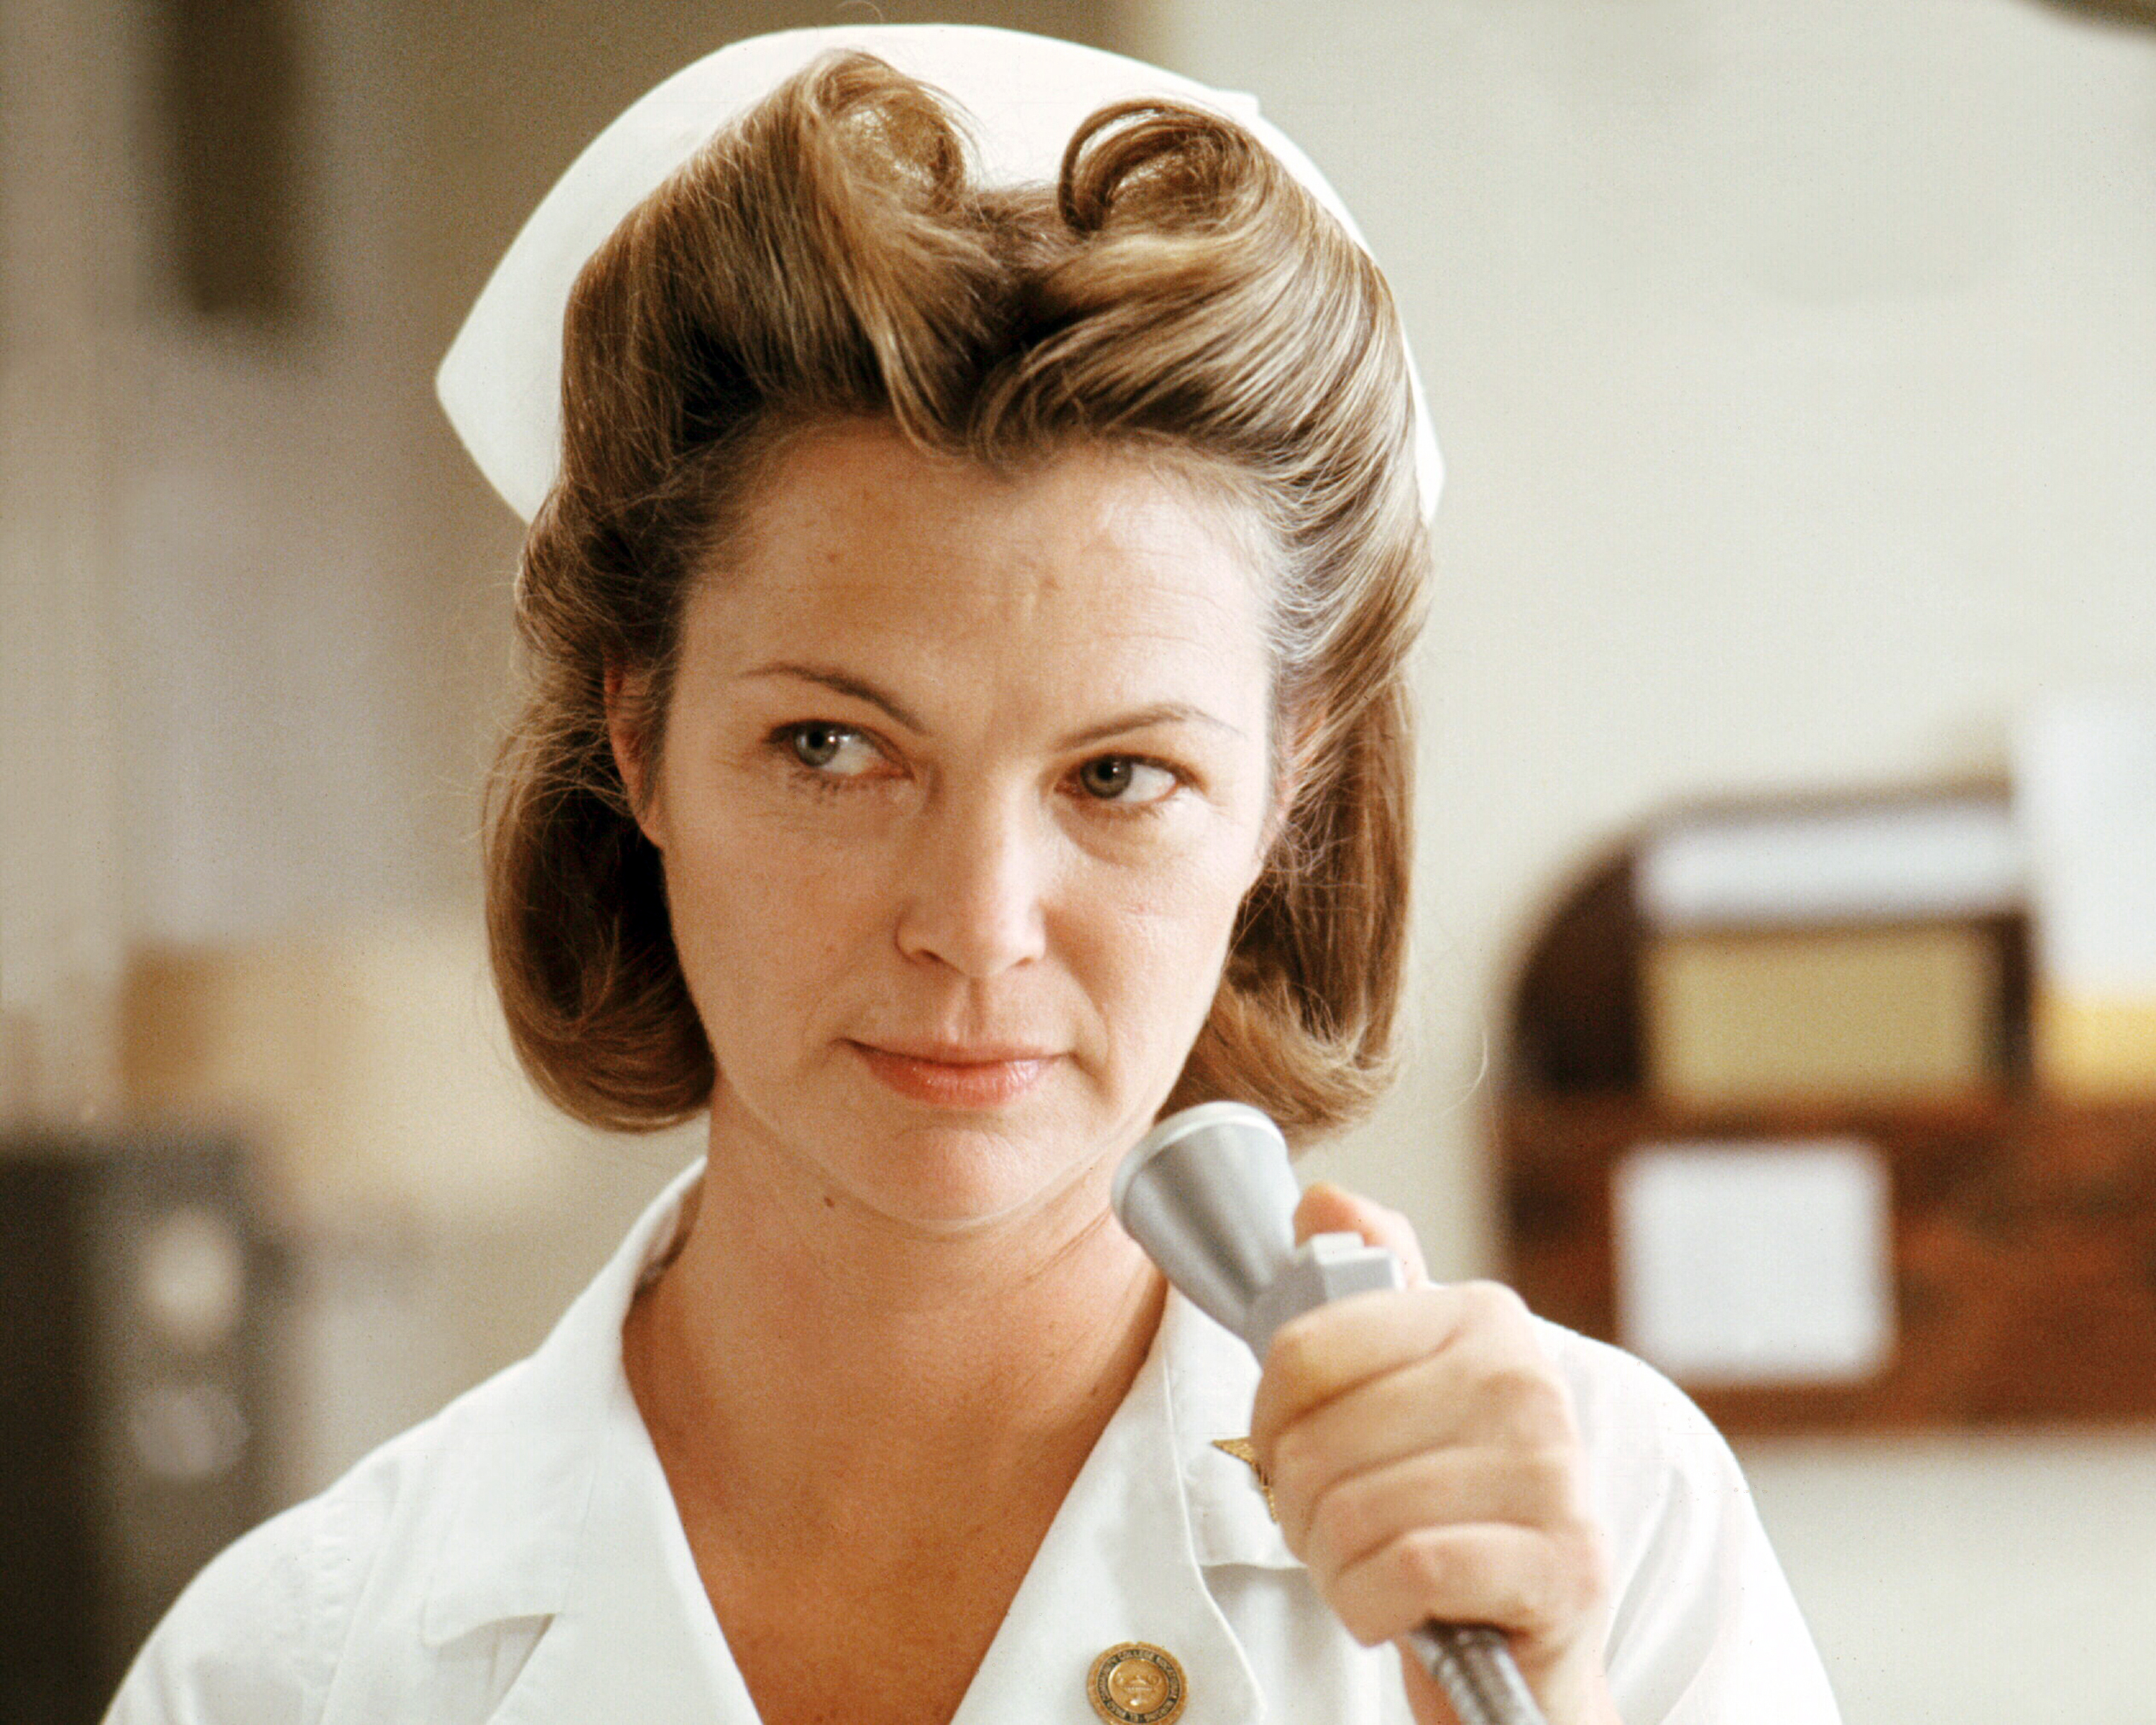 Louise Fletcher as Nurse Ratched in 'One Flew Over The Cuckoo's Nest', directed by Milos Forman, 1975. (Getty Images—2013 Silver Screen Collection)